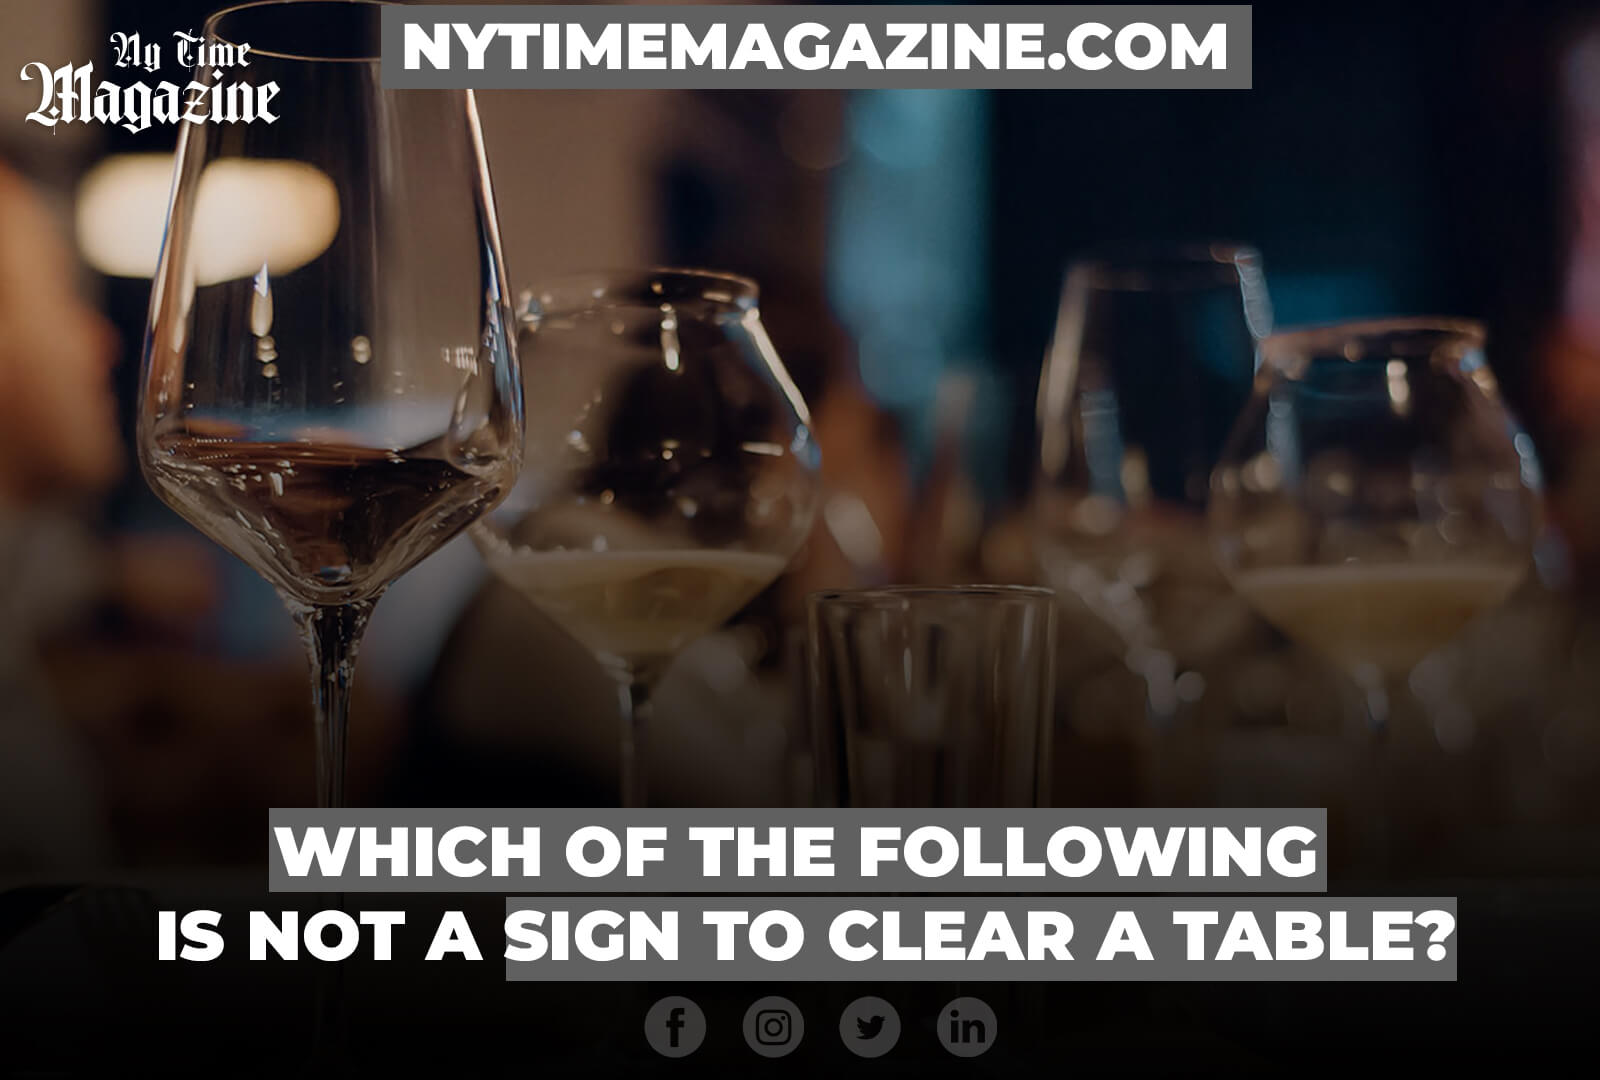 WHICH OF THE FOLLOWING IS NOT A SIGN TO CLEAR A TABLE?